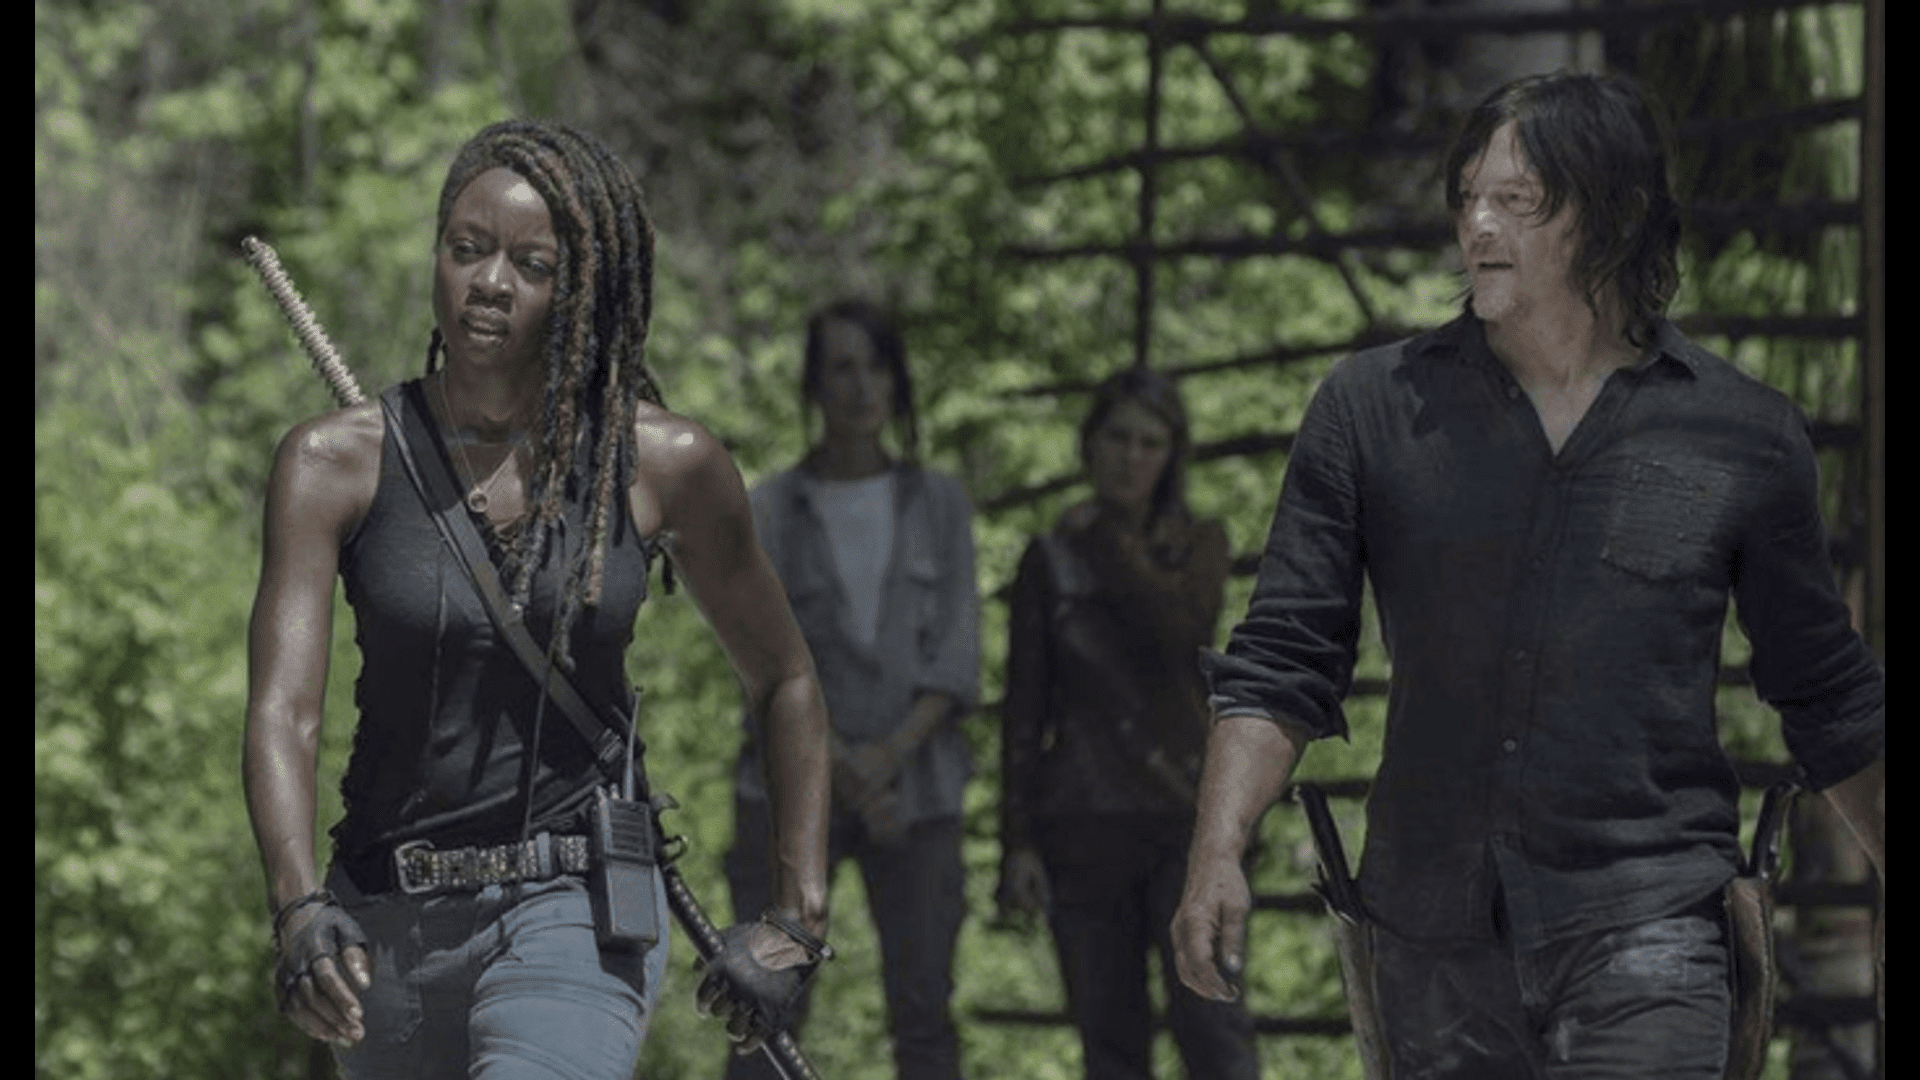 The Walking Dead has finished shooting. The end of an era in television